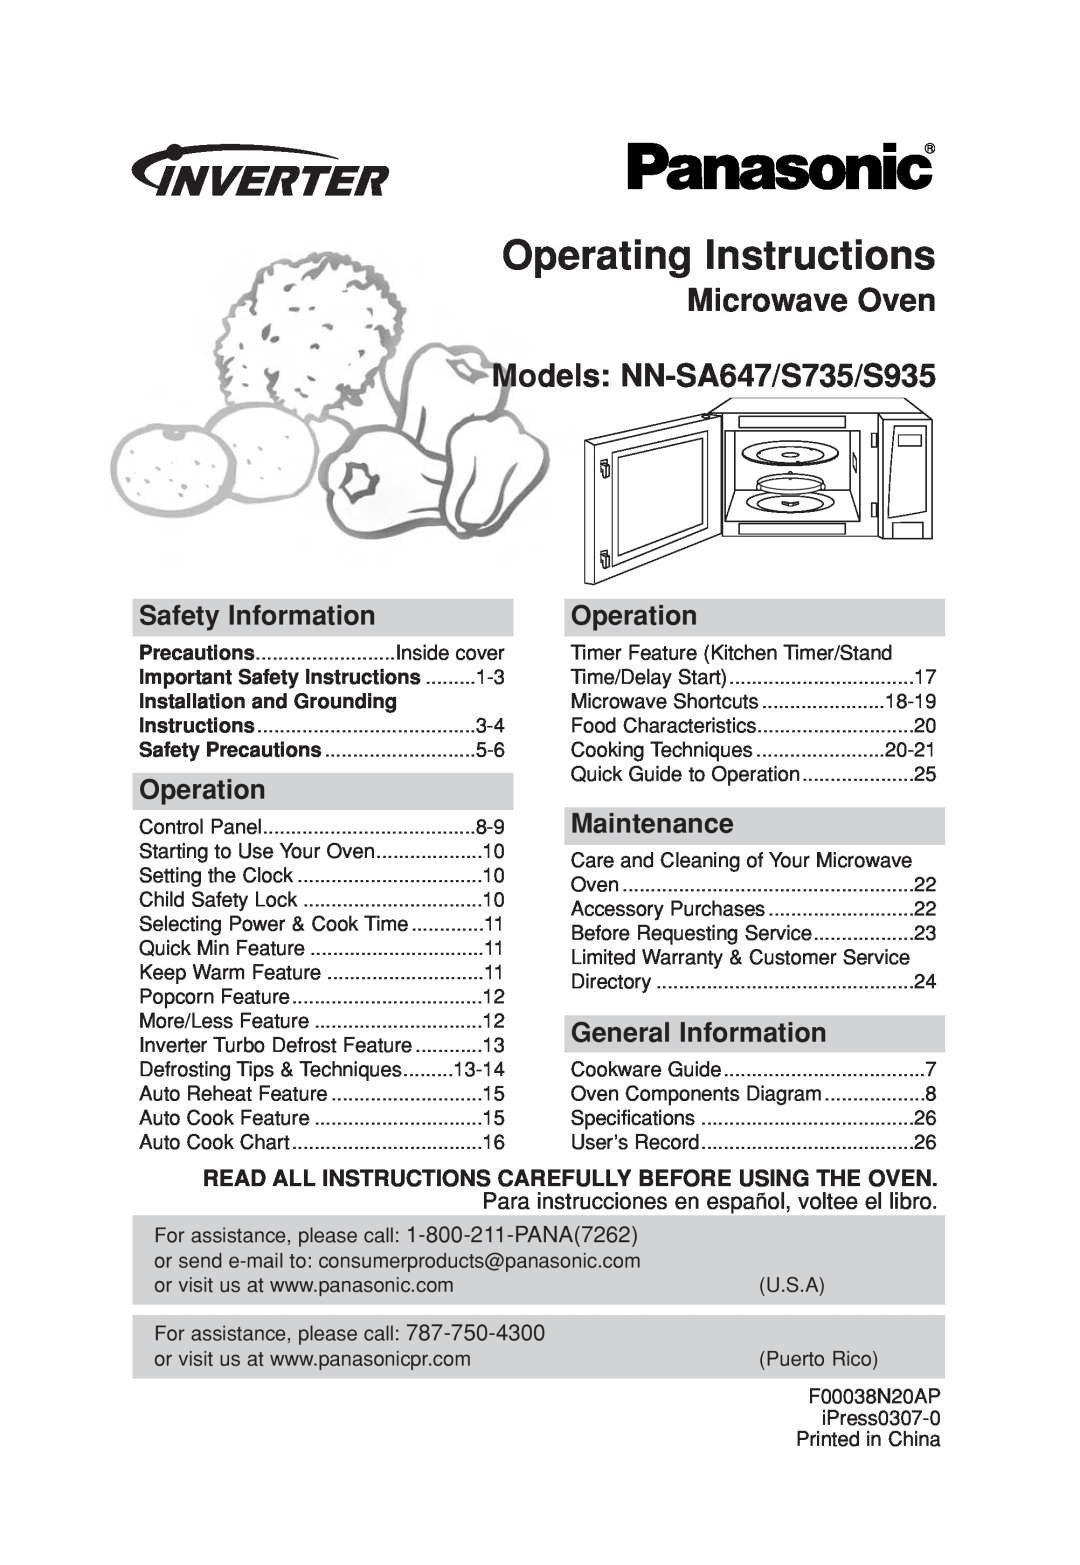 Panasonic NN-S935 operating instructions Operating Instructions, Microwave Oven Models NN-SA647/S735/S935, Operation 